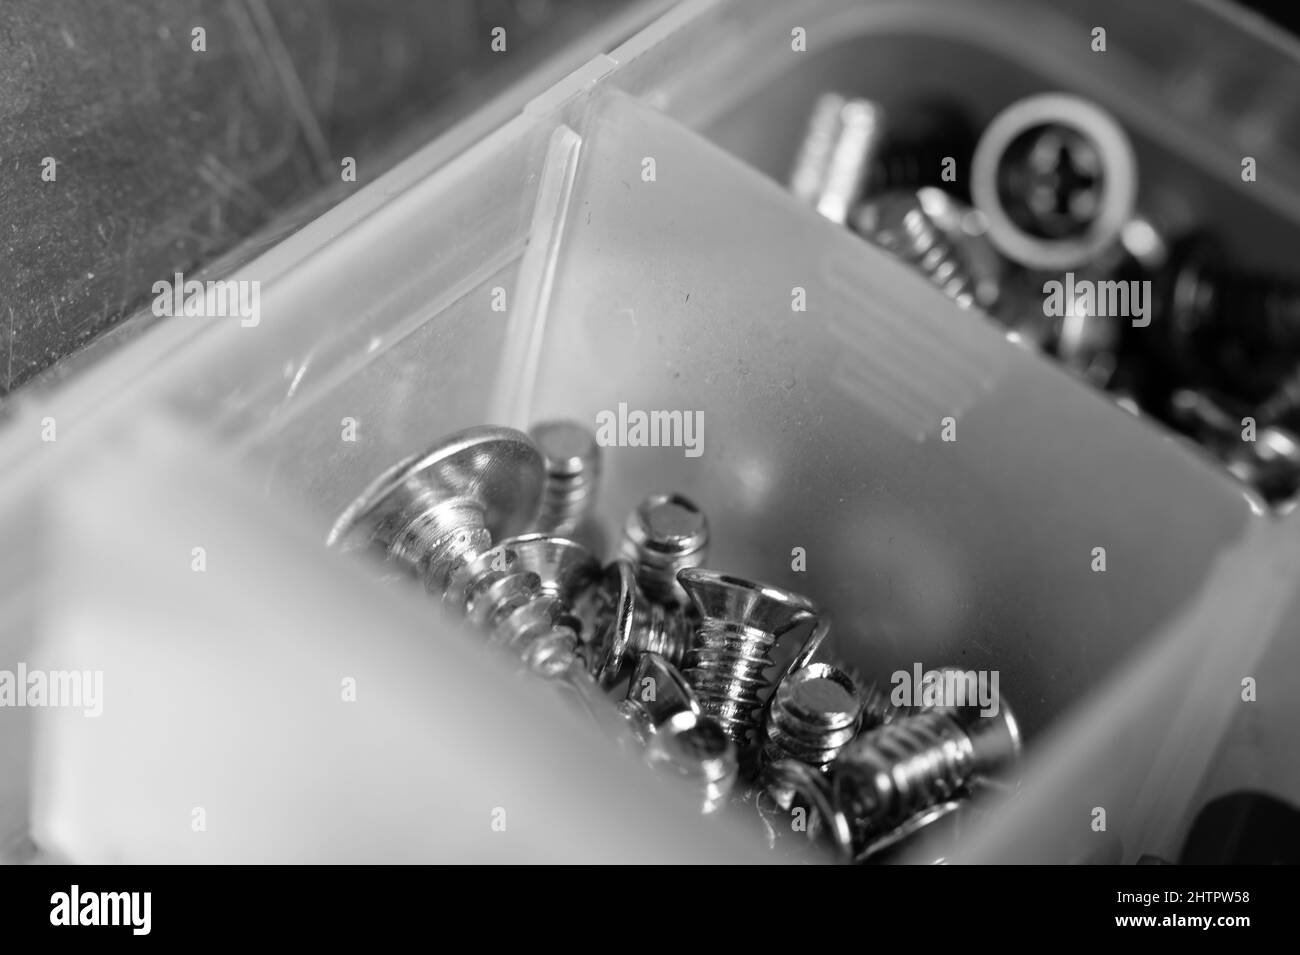 Grayscale shot of screws in boxes Stock Photo